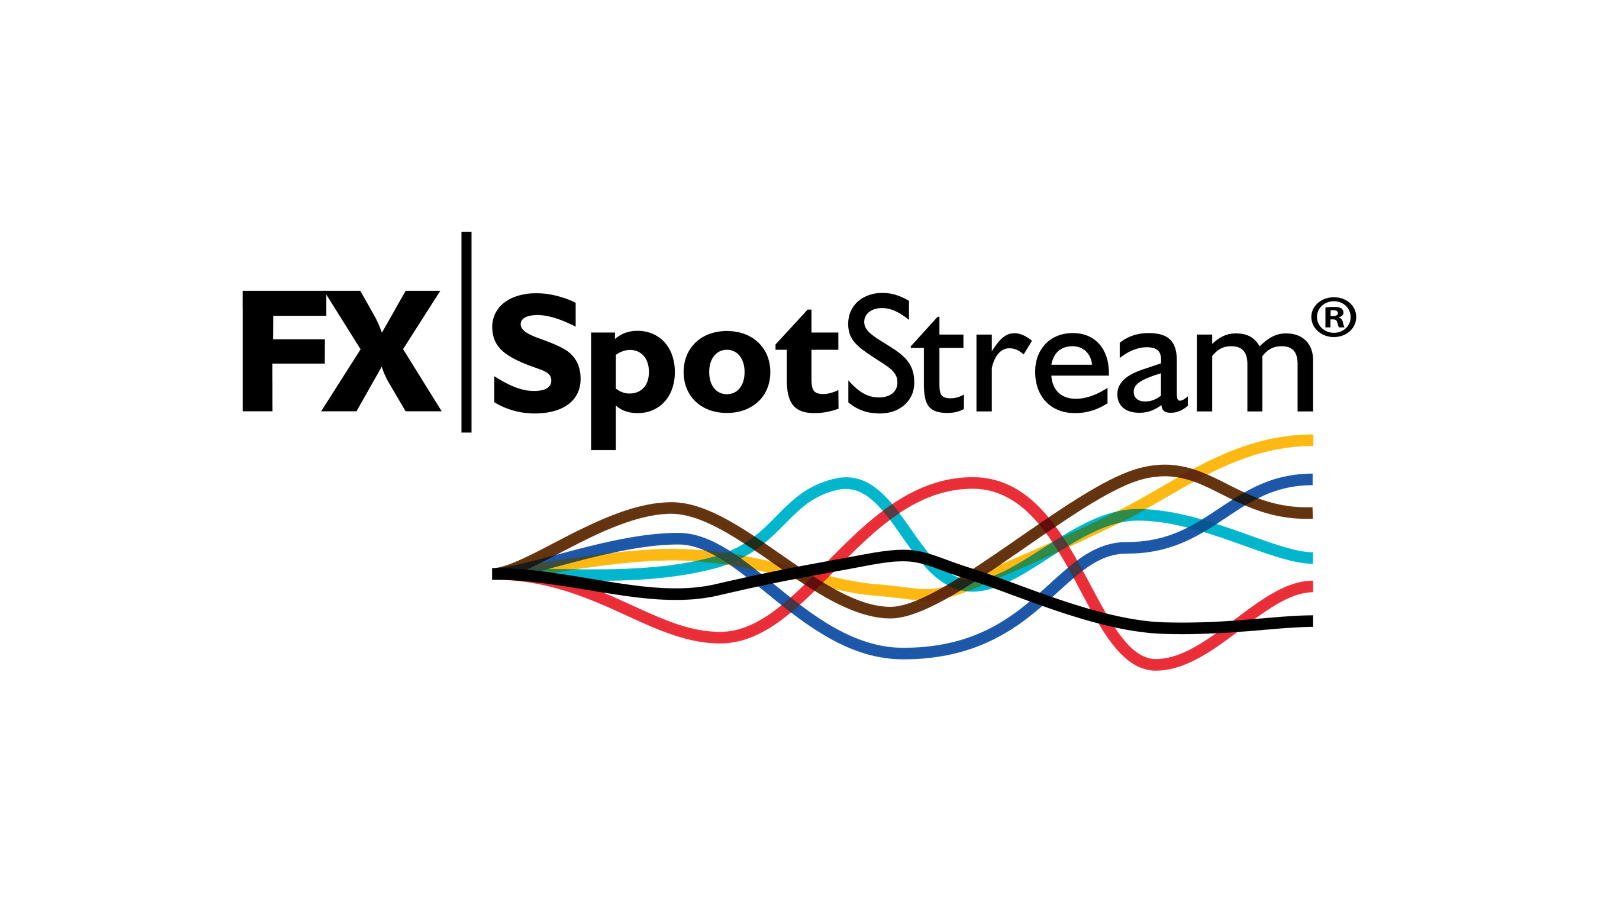 FXSpotStream Announce October Volumes, Up 37.01% Year on Year. 